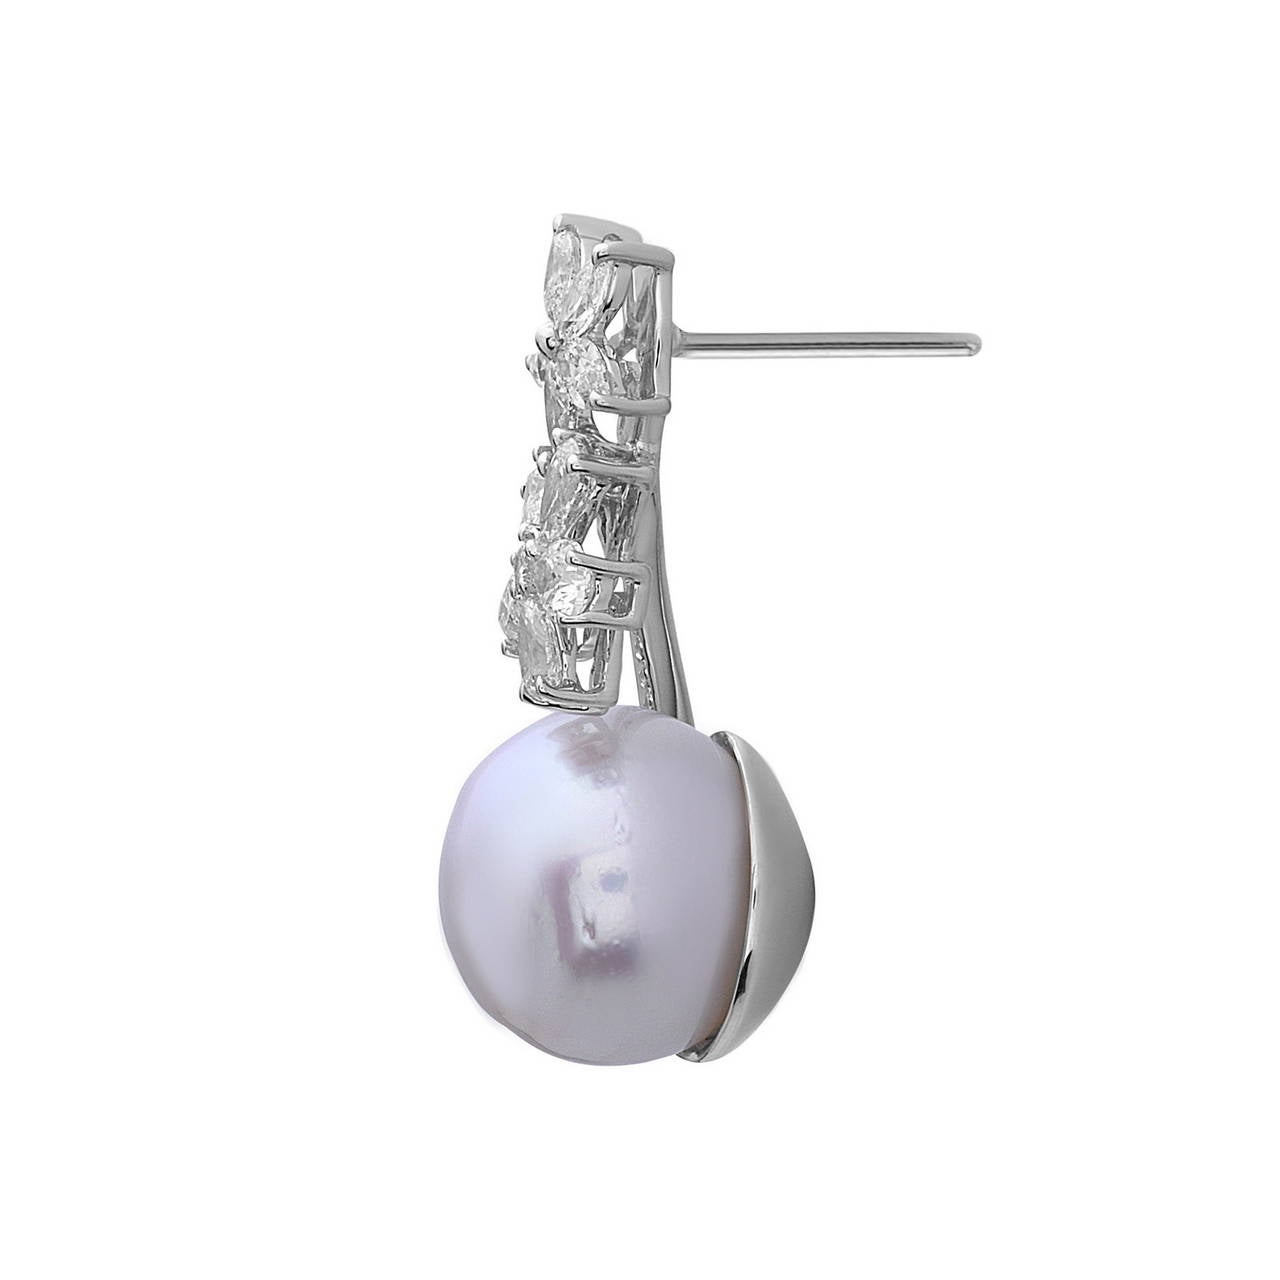 This Stunning Floral Diamond & South Sea Pearl Earring  is made in 18K White Gold with marquee, pear, round diamond & South Sea Pearl. The ear closure is push post. We provide GCAL certificate with this item.

Diamond weight: 2.48cts, Quality: G